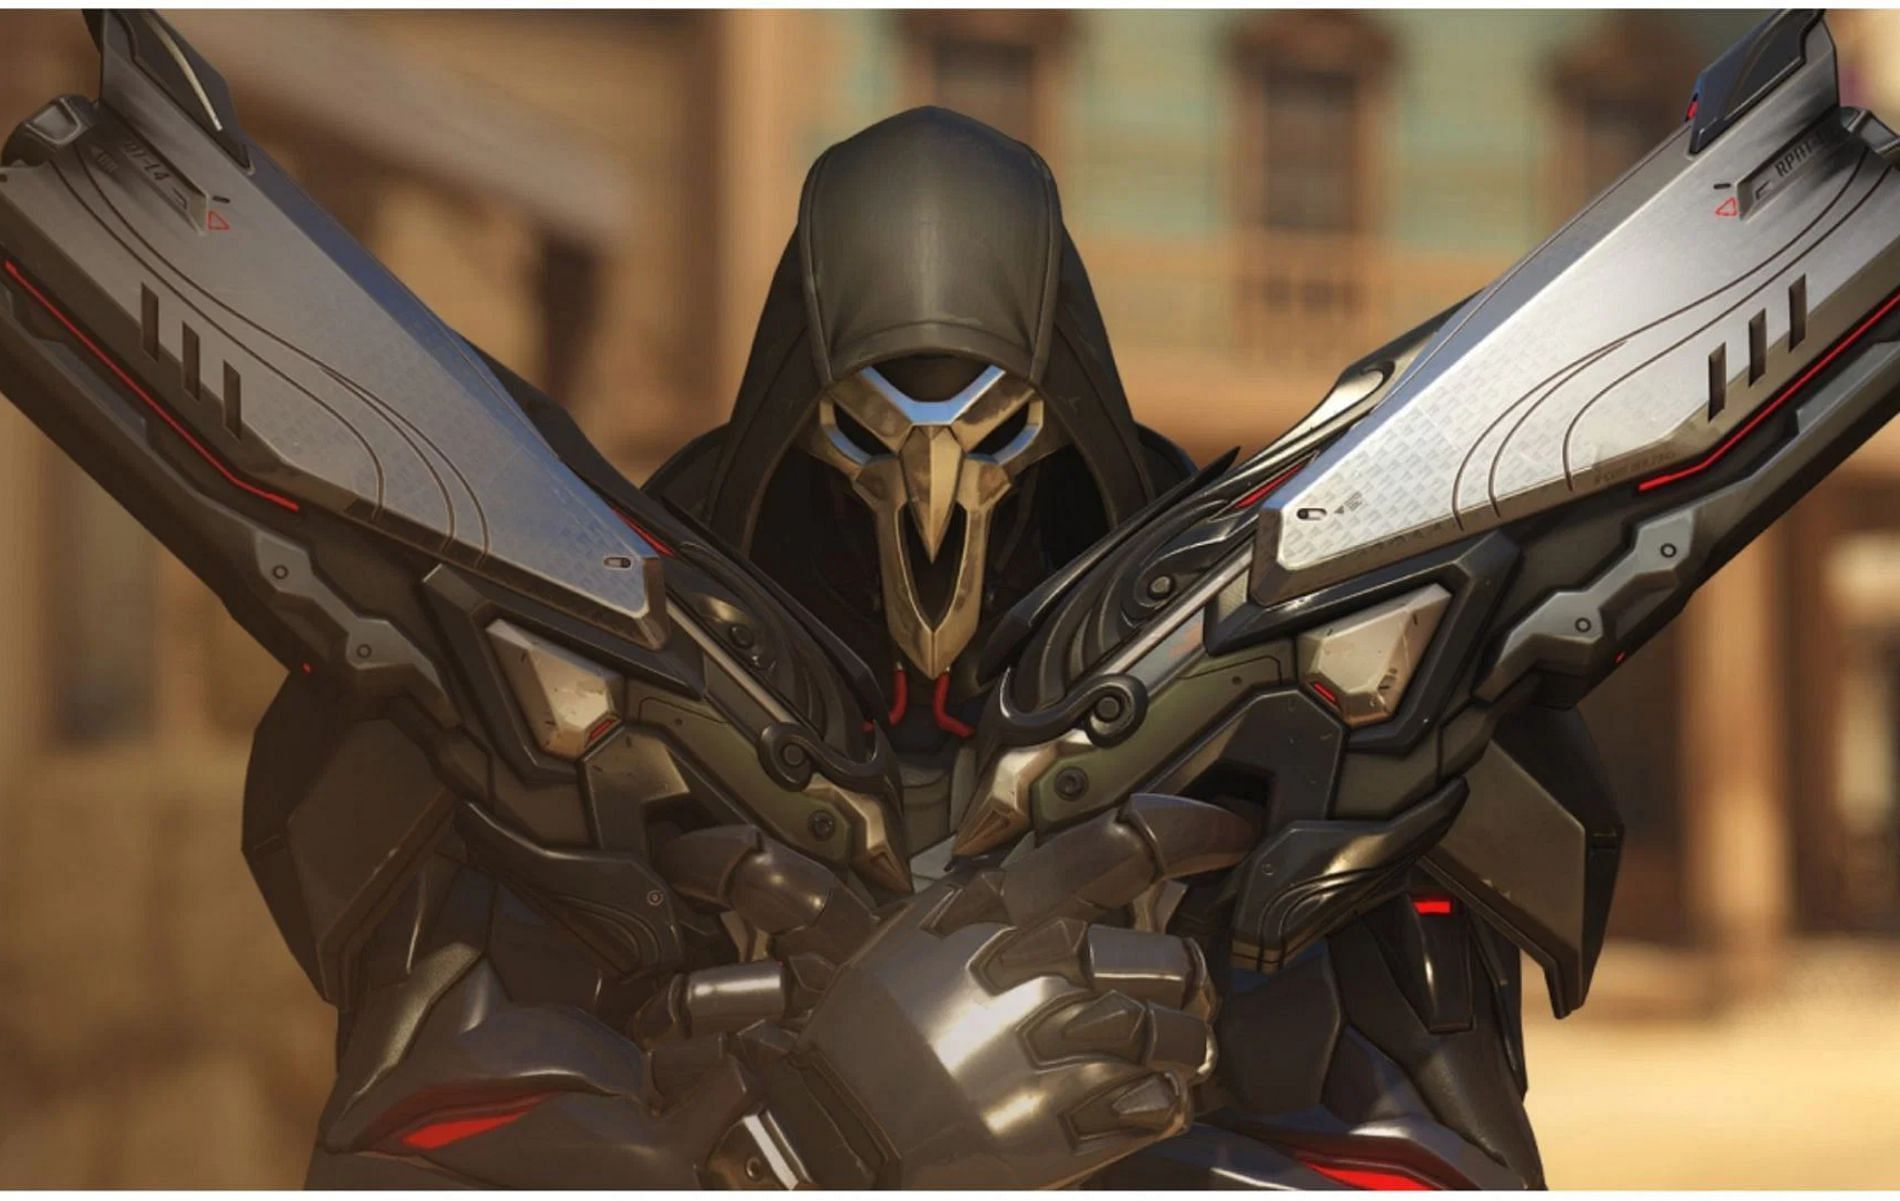 Reaper&rsquo;s Hellfire Shotguns can turn out to be lethal weapons in the right hands (Image via Blizzard Entertainment)